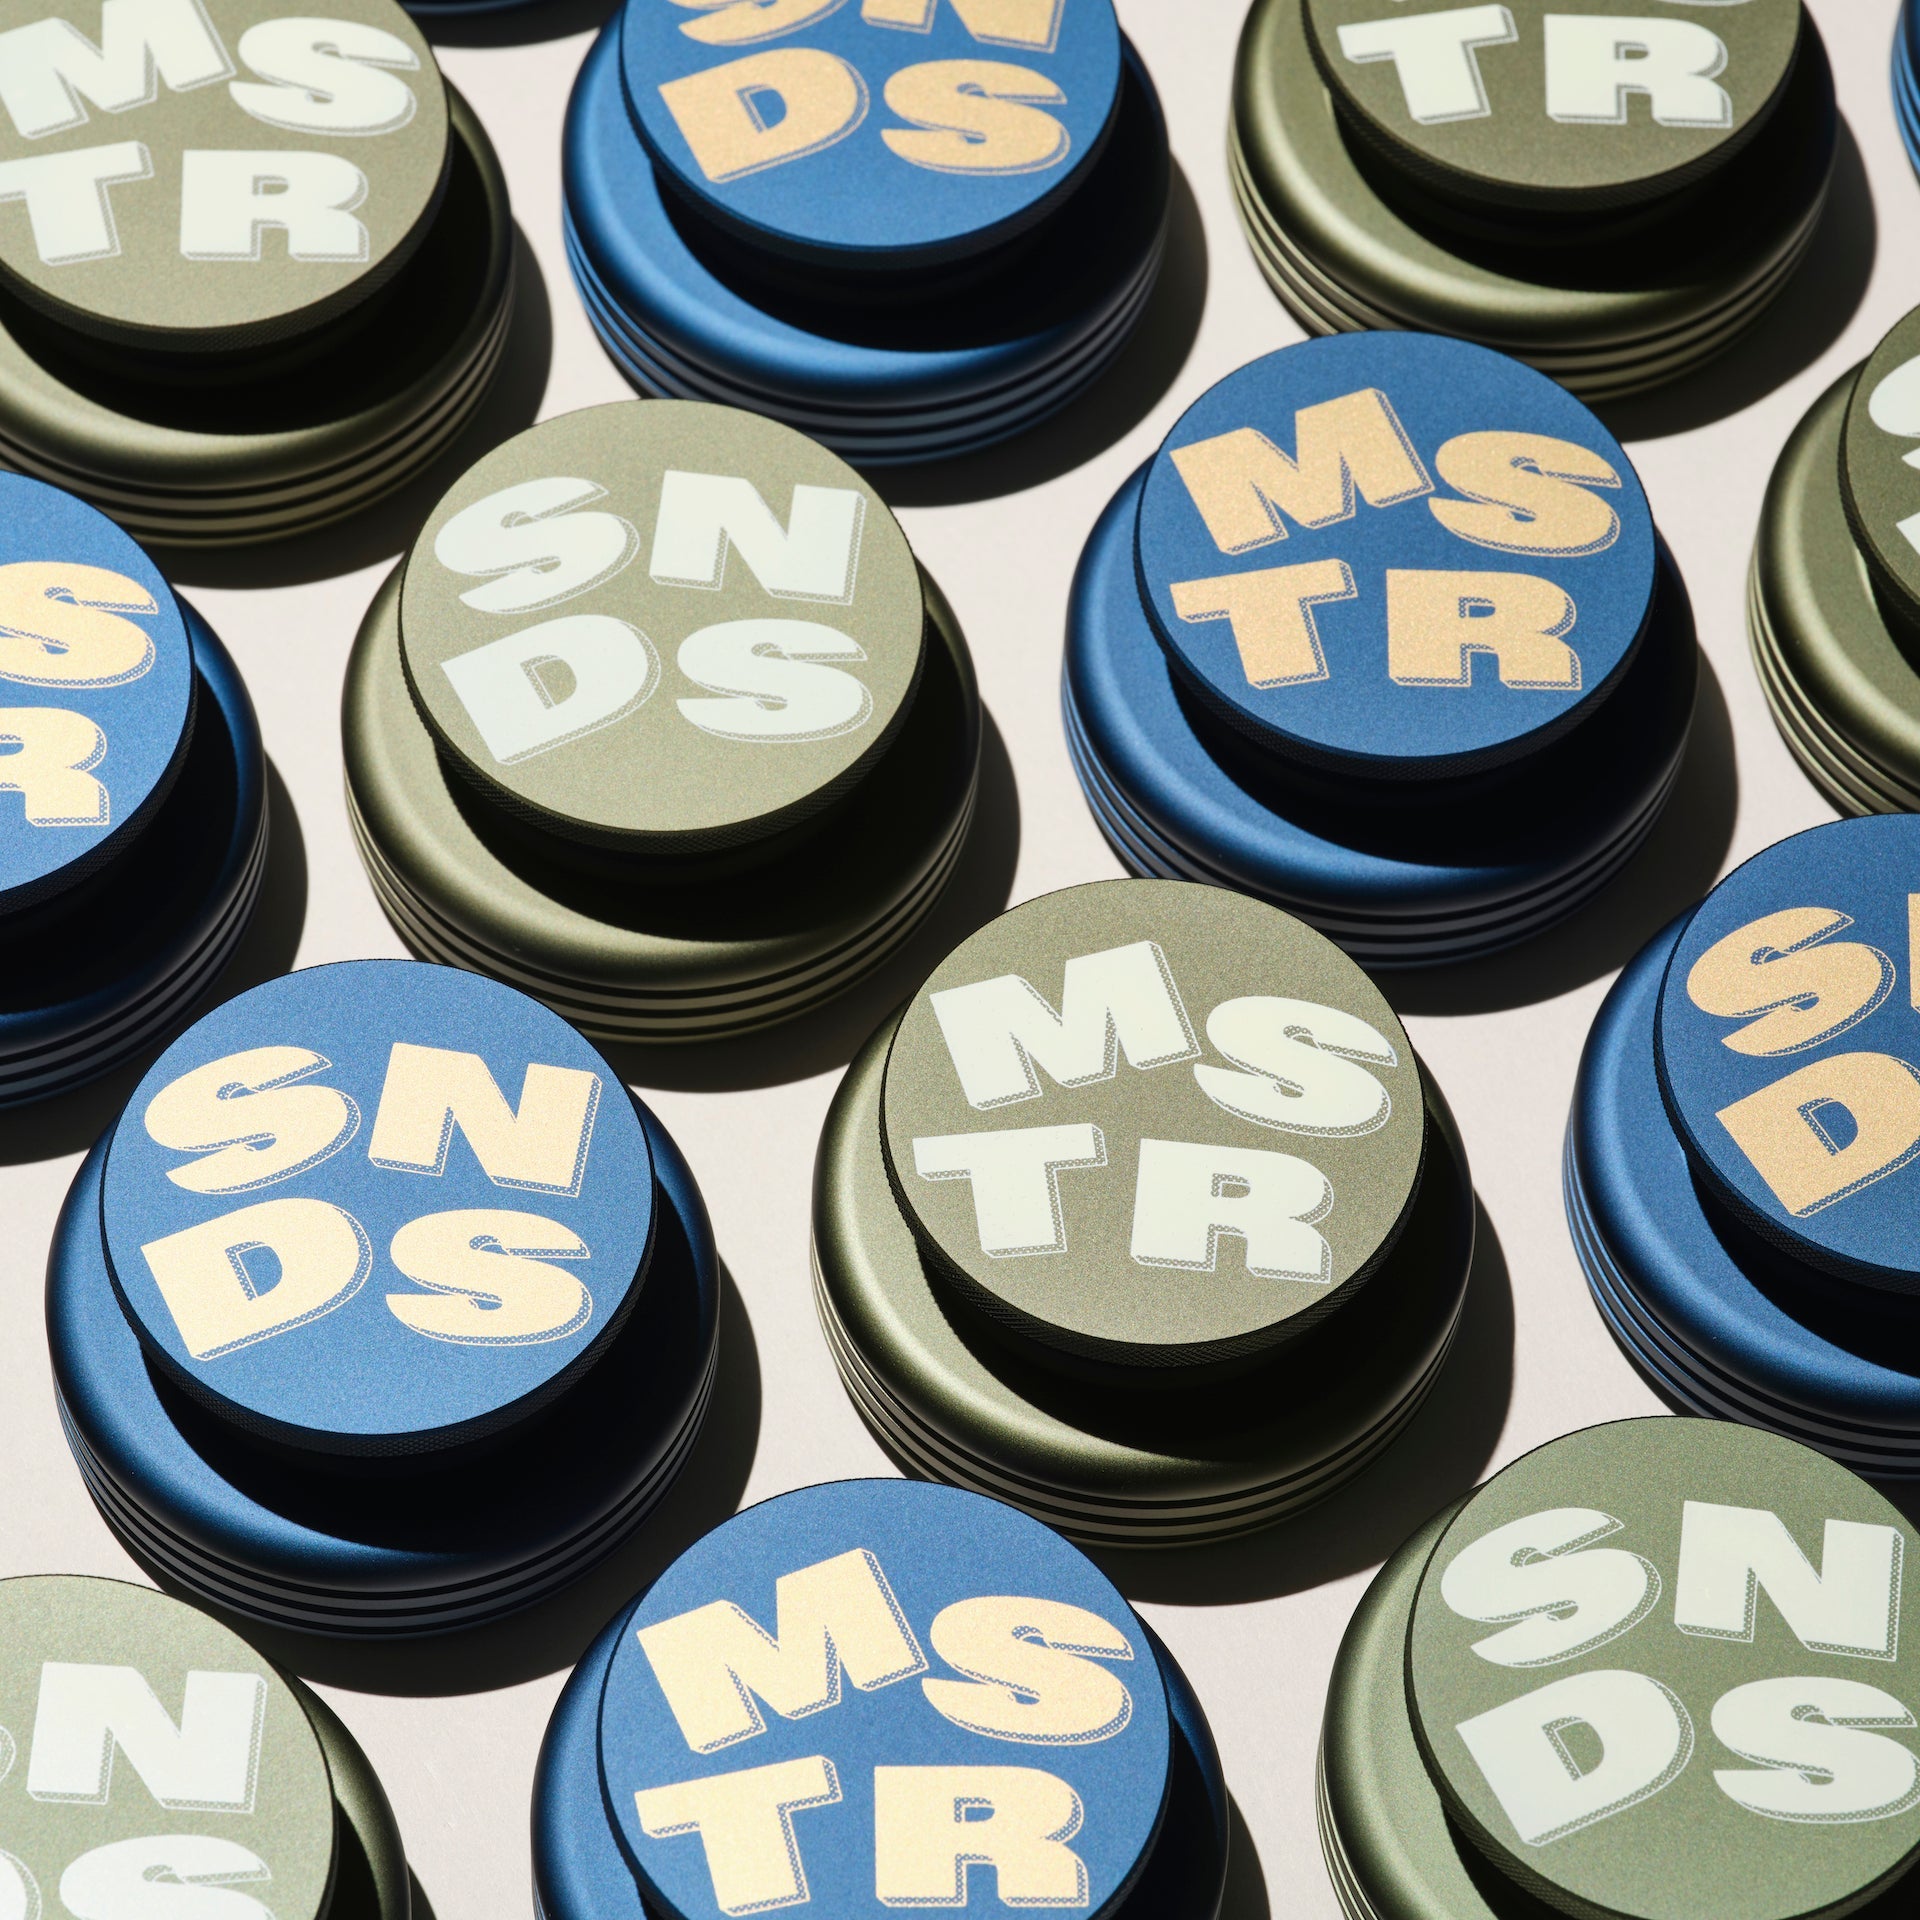 New Product: "MSTR SNDS" Limited Edition Audio Accessories - MasterSounds